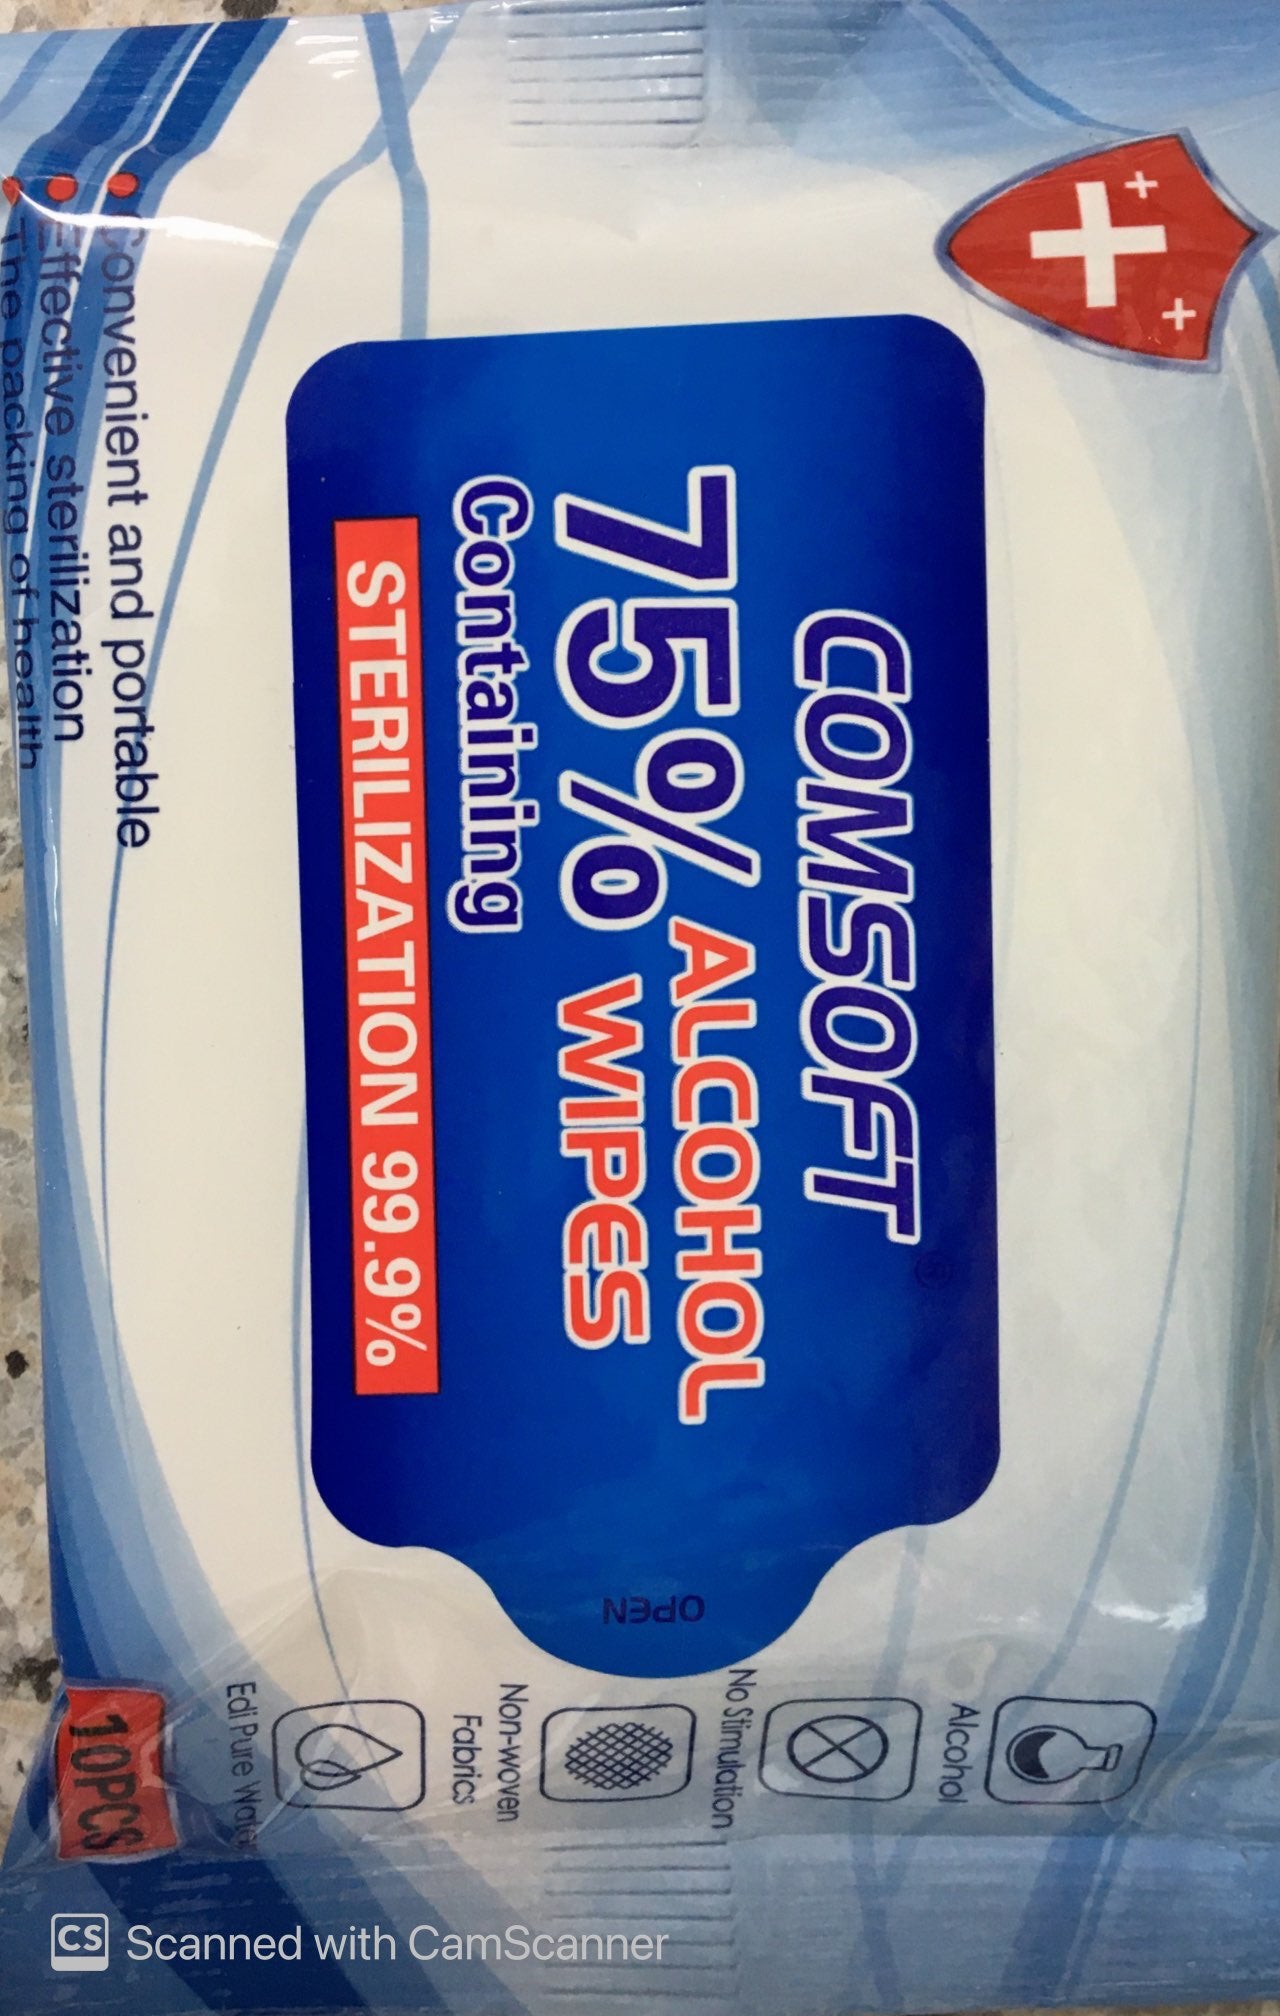 Comsoft 75% Alc Wipes 10 pieces per pack